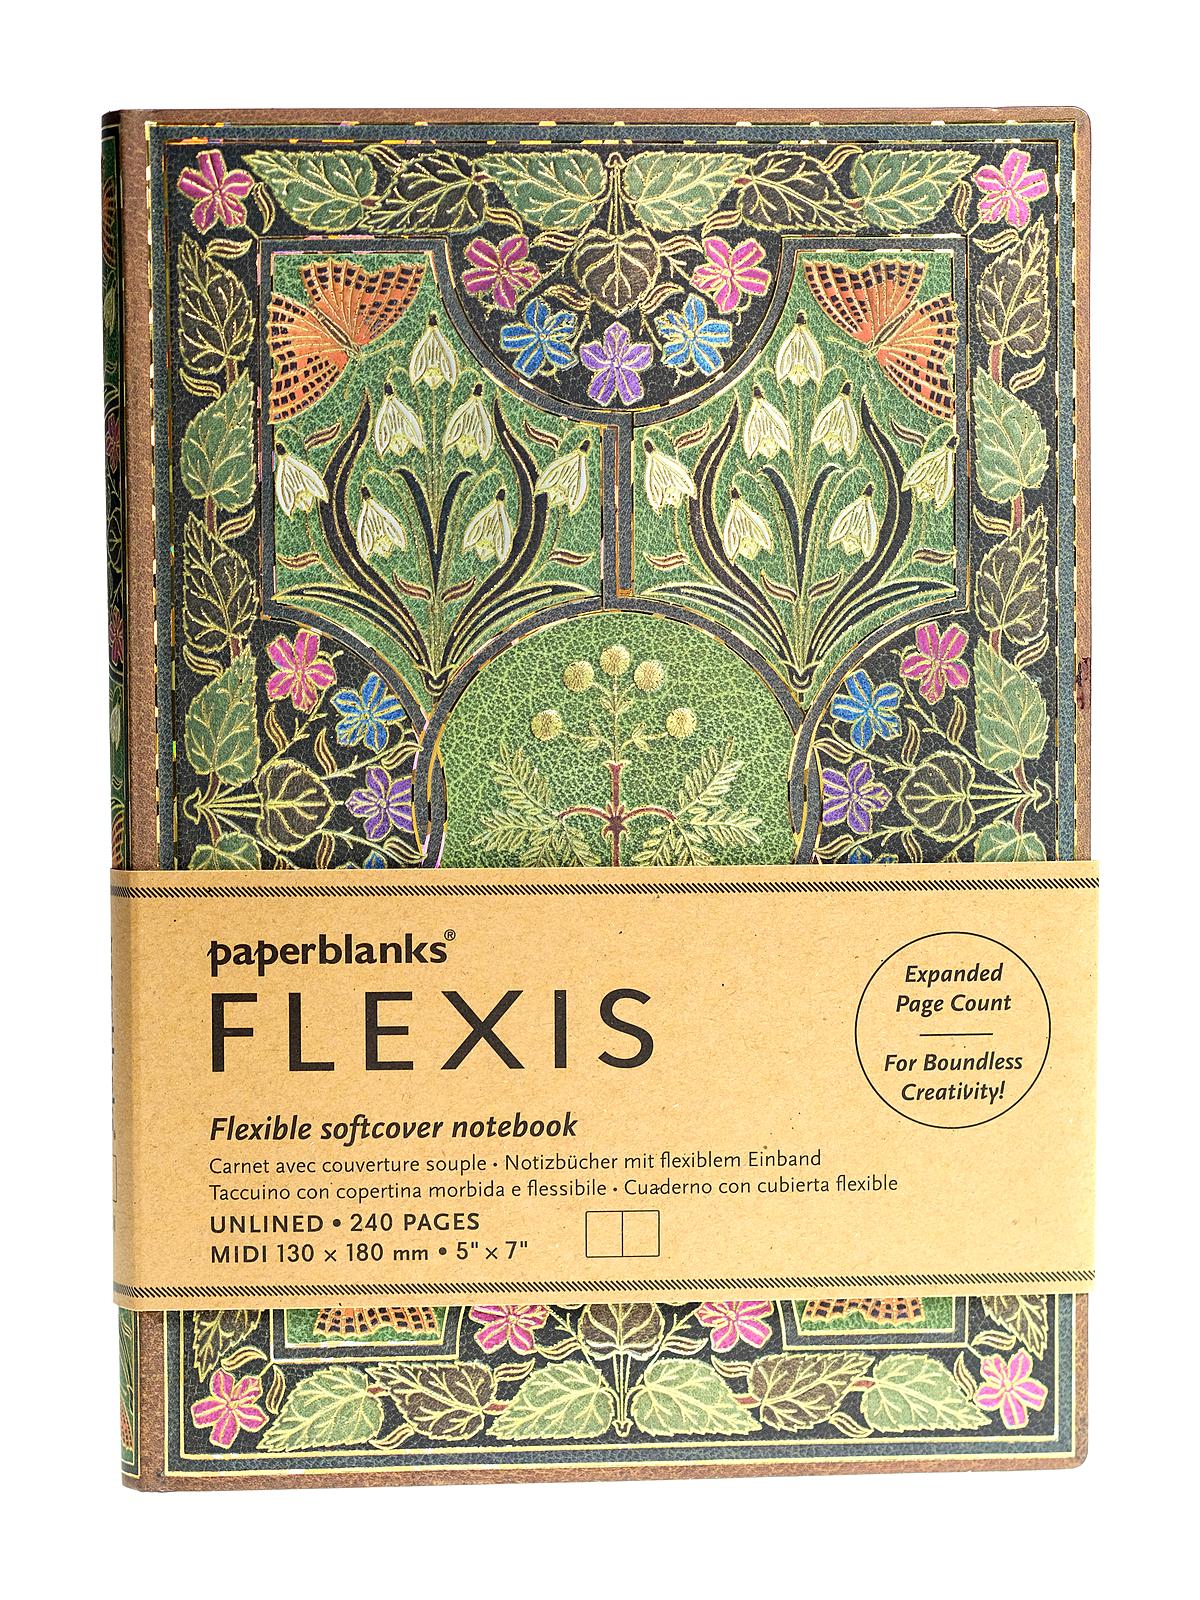 Poetry In Bloom Flexis Midi 240 Pages, Unlined 5 In. X 7 In.